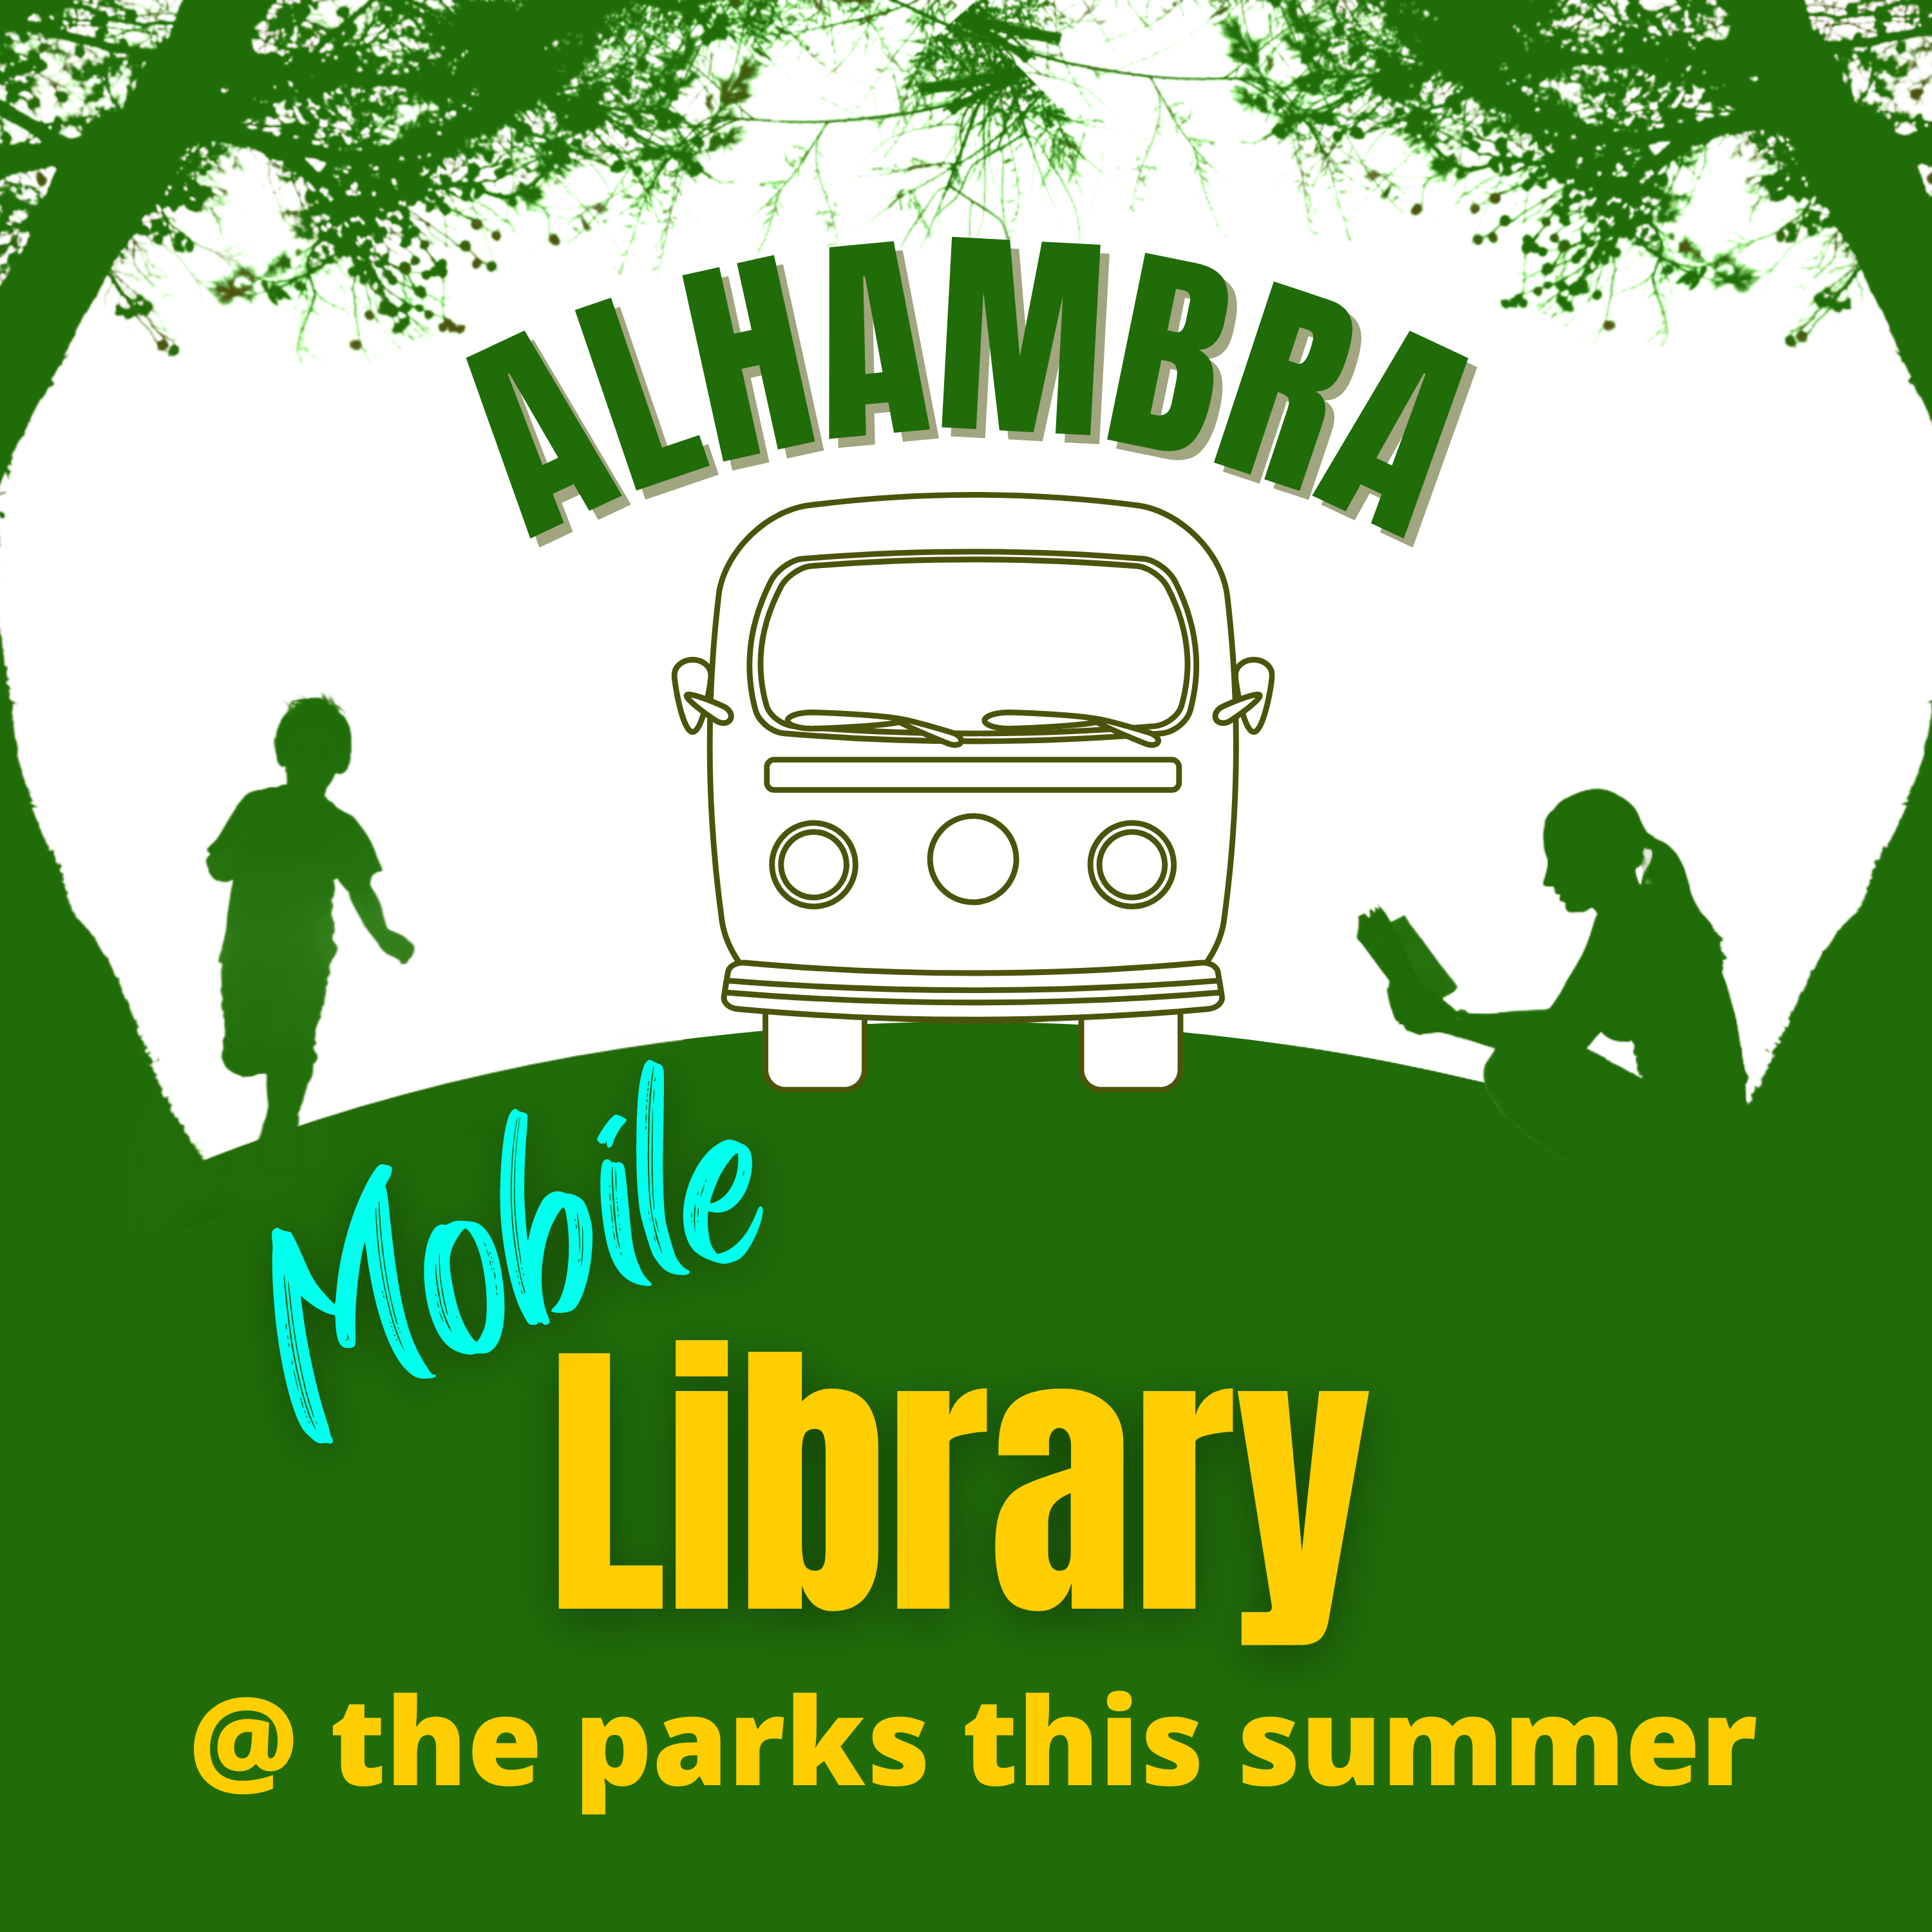 green and white image with mobile van, trees, and people at a park